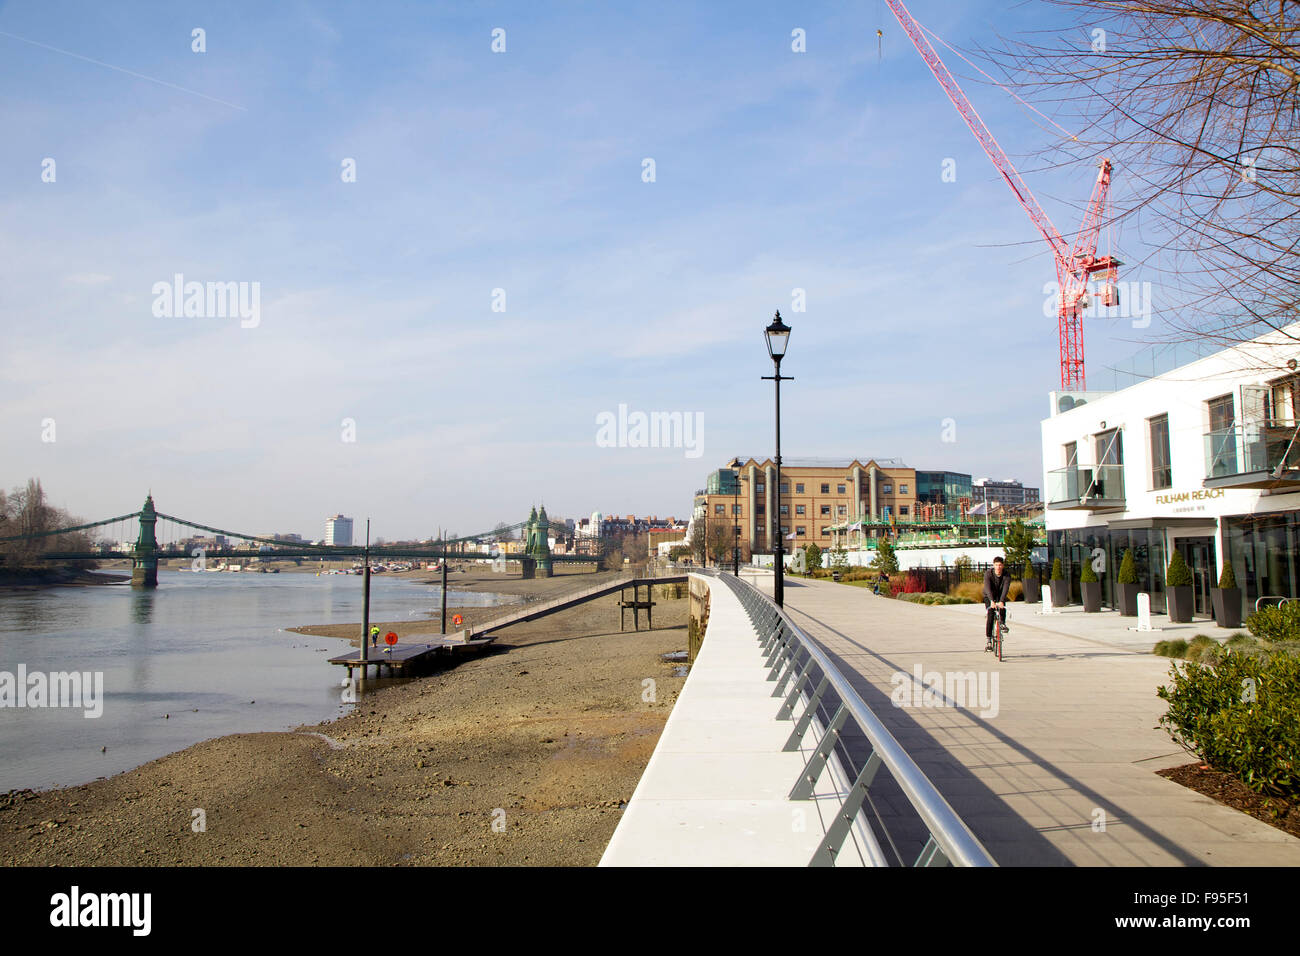 Hammersmith, London. View of the Thames Path with a cyclist riding on it. Building crane and bridge in the distance. Stock Photo